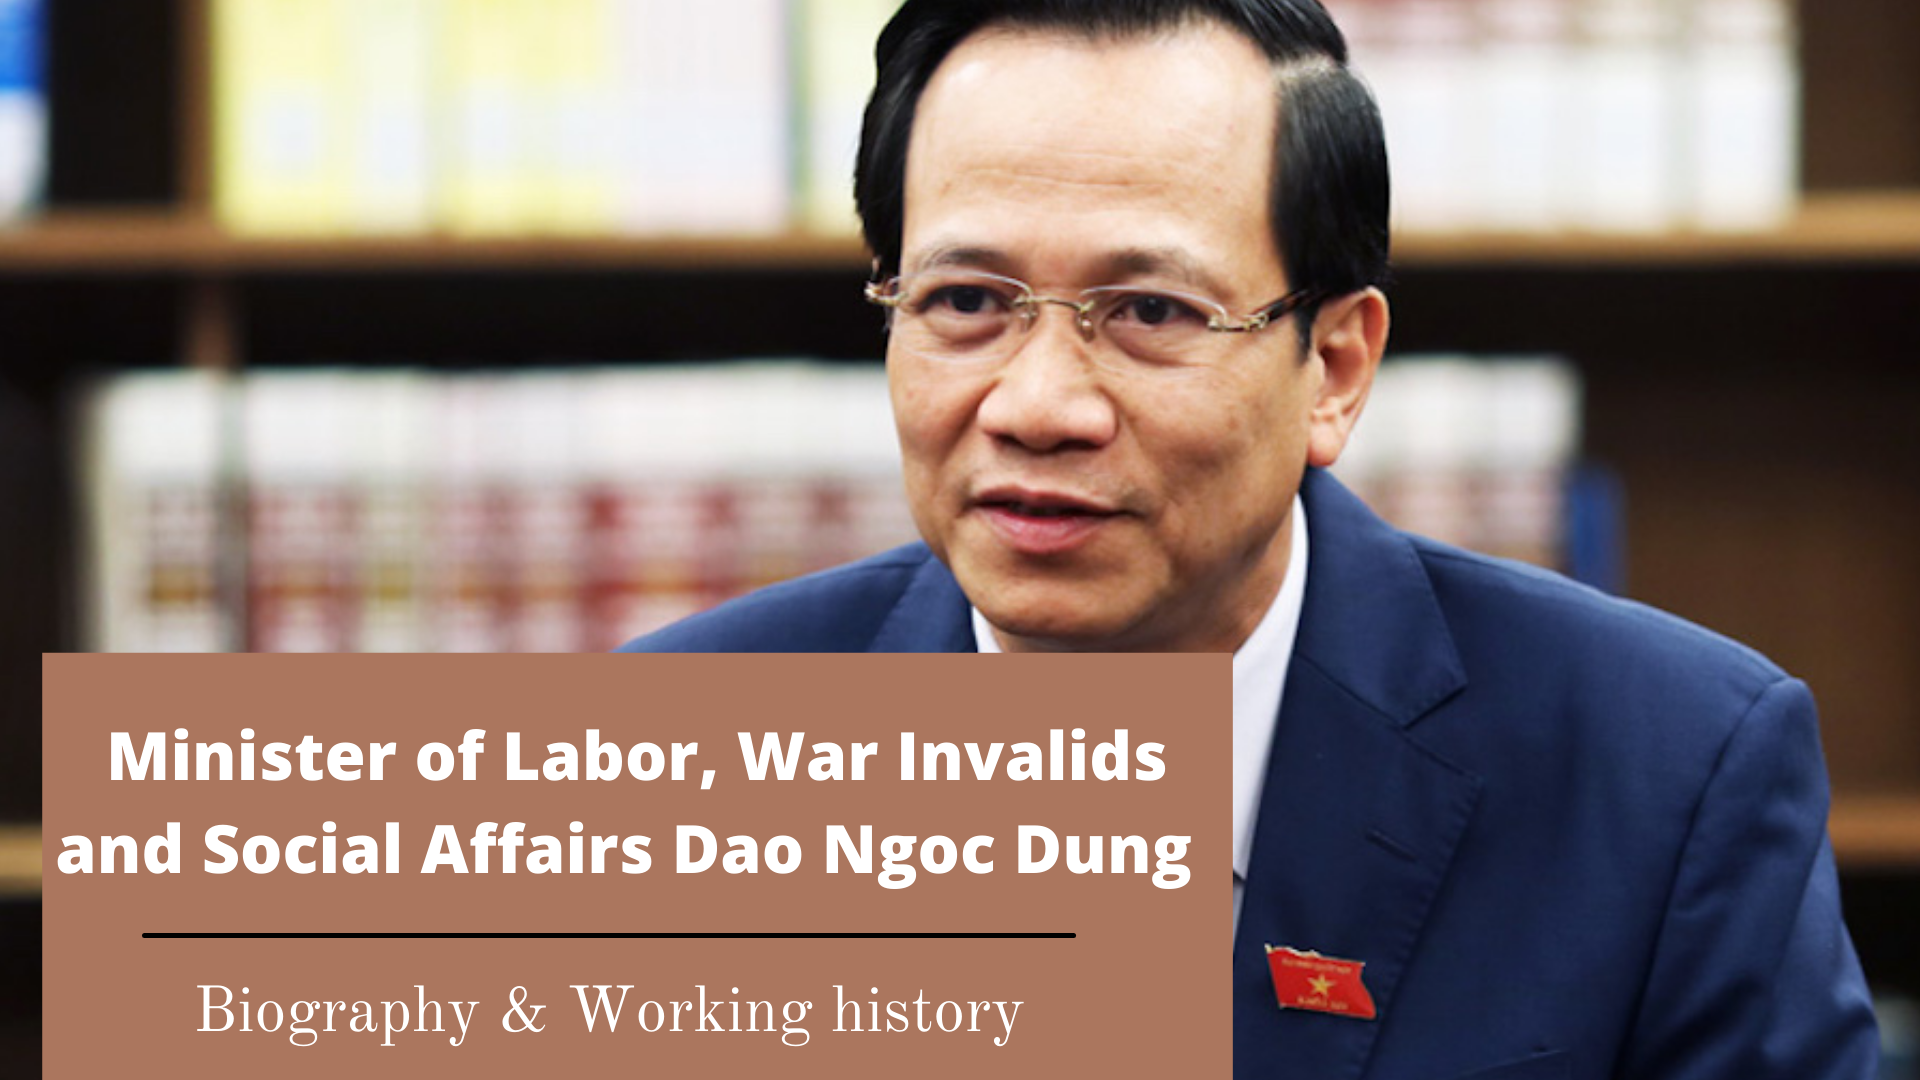 Biography of Minister of Labor, War Invalids and Social Affairs Dao Ngoc Dung: Positions and Working History